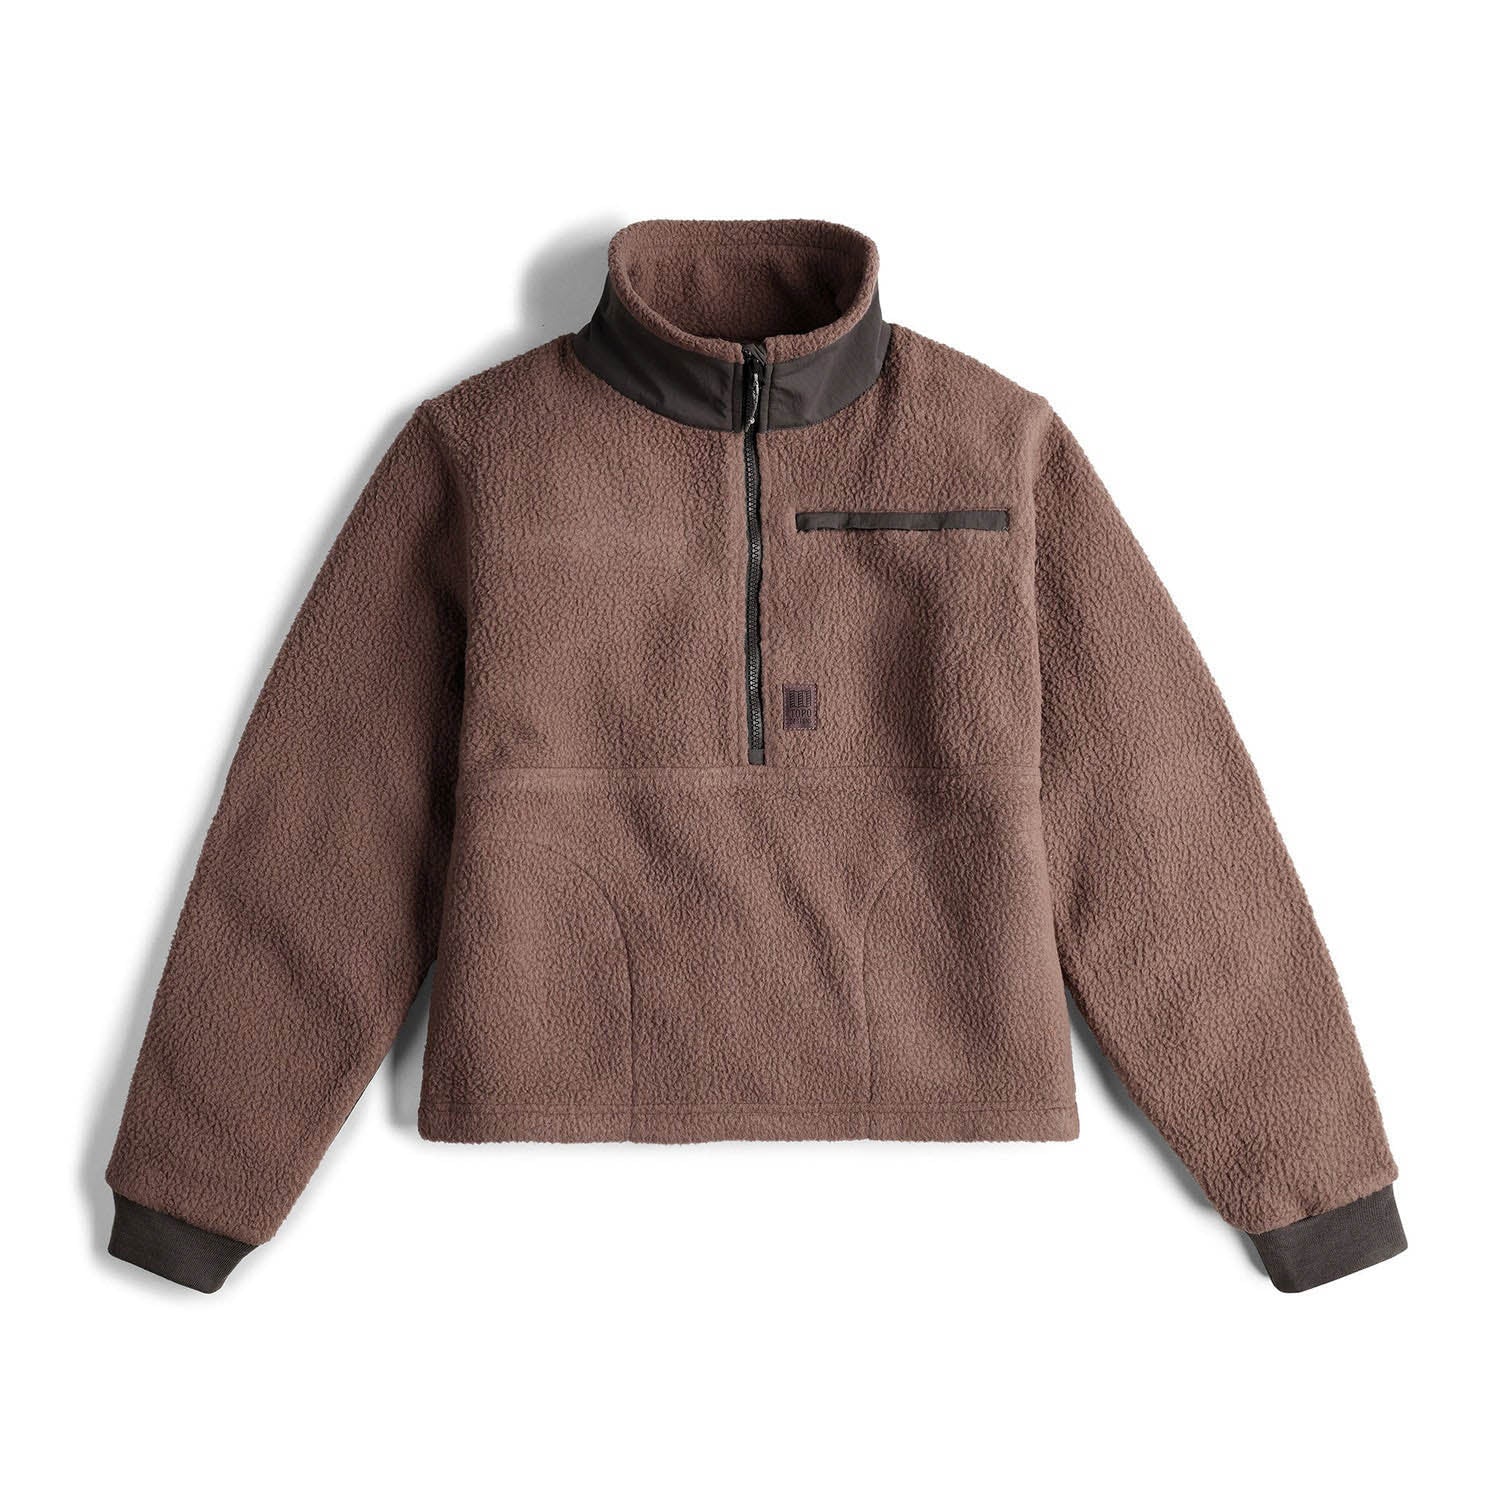 Pull - Mountain Fleece Pullover - Peppercorn Charcoal